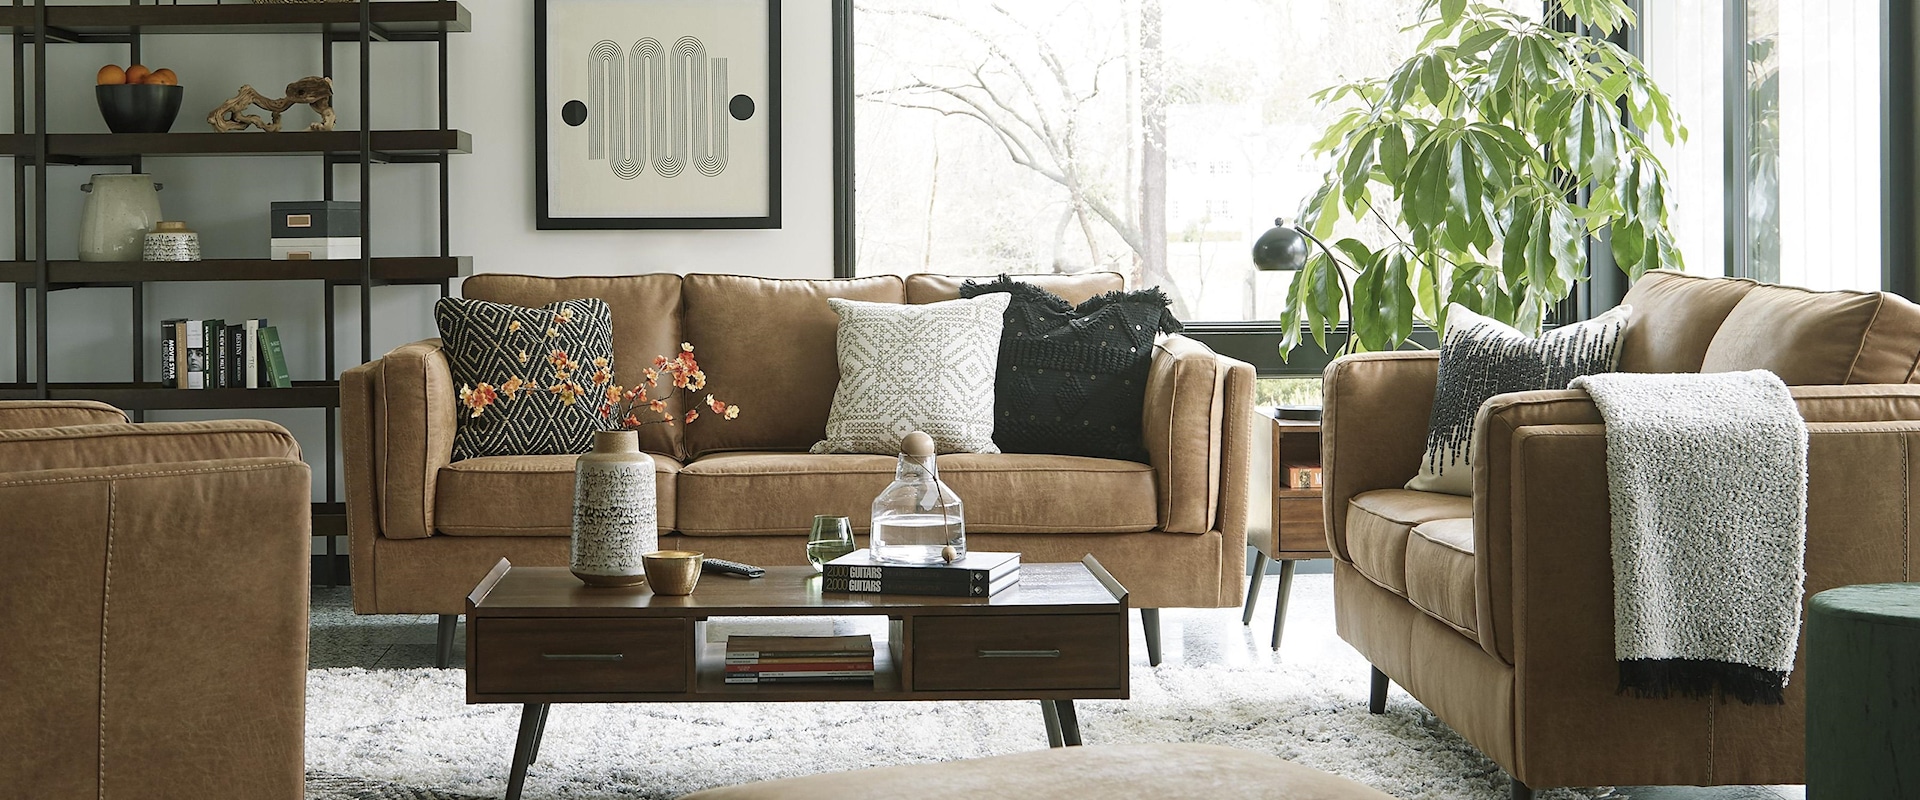 Faux Leather Caramel Sofa, Chair and Ottoman Set